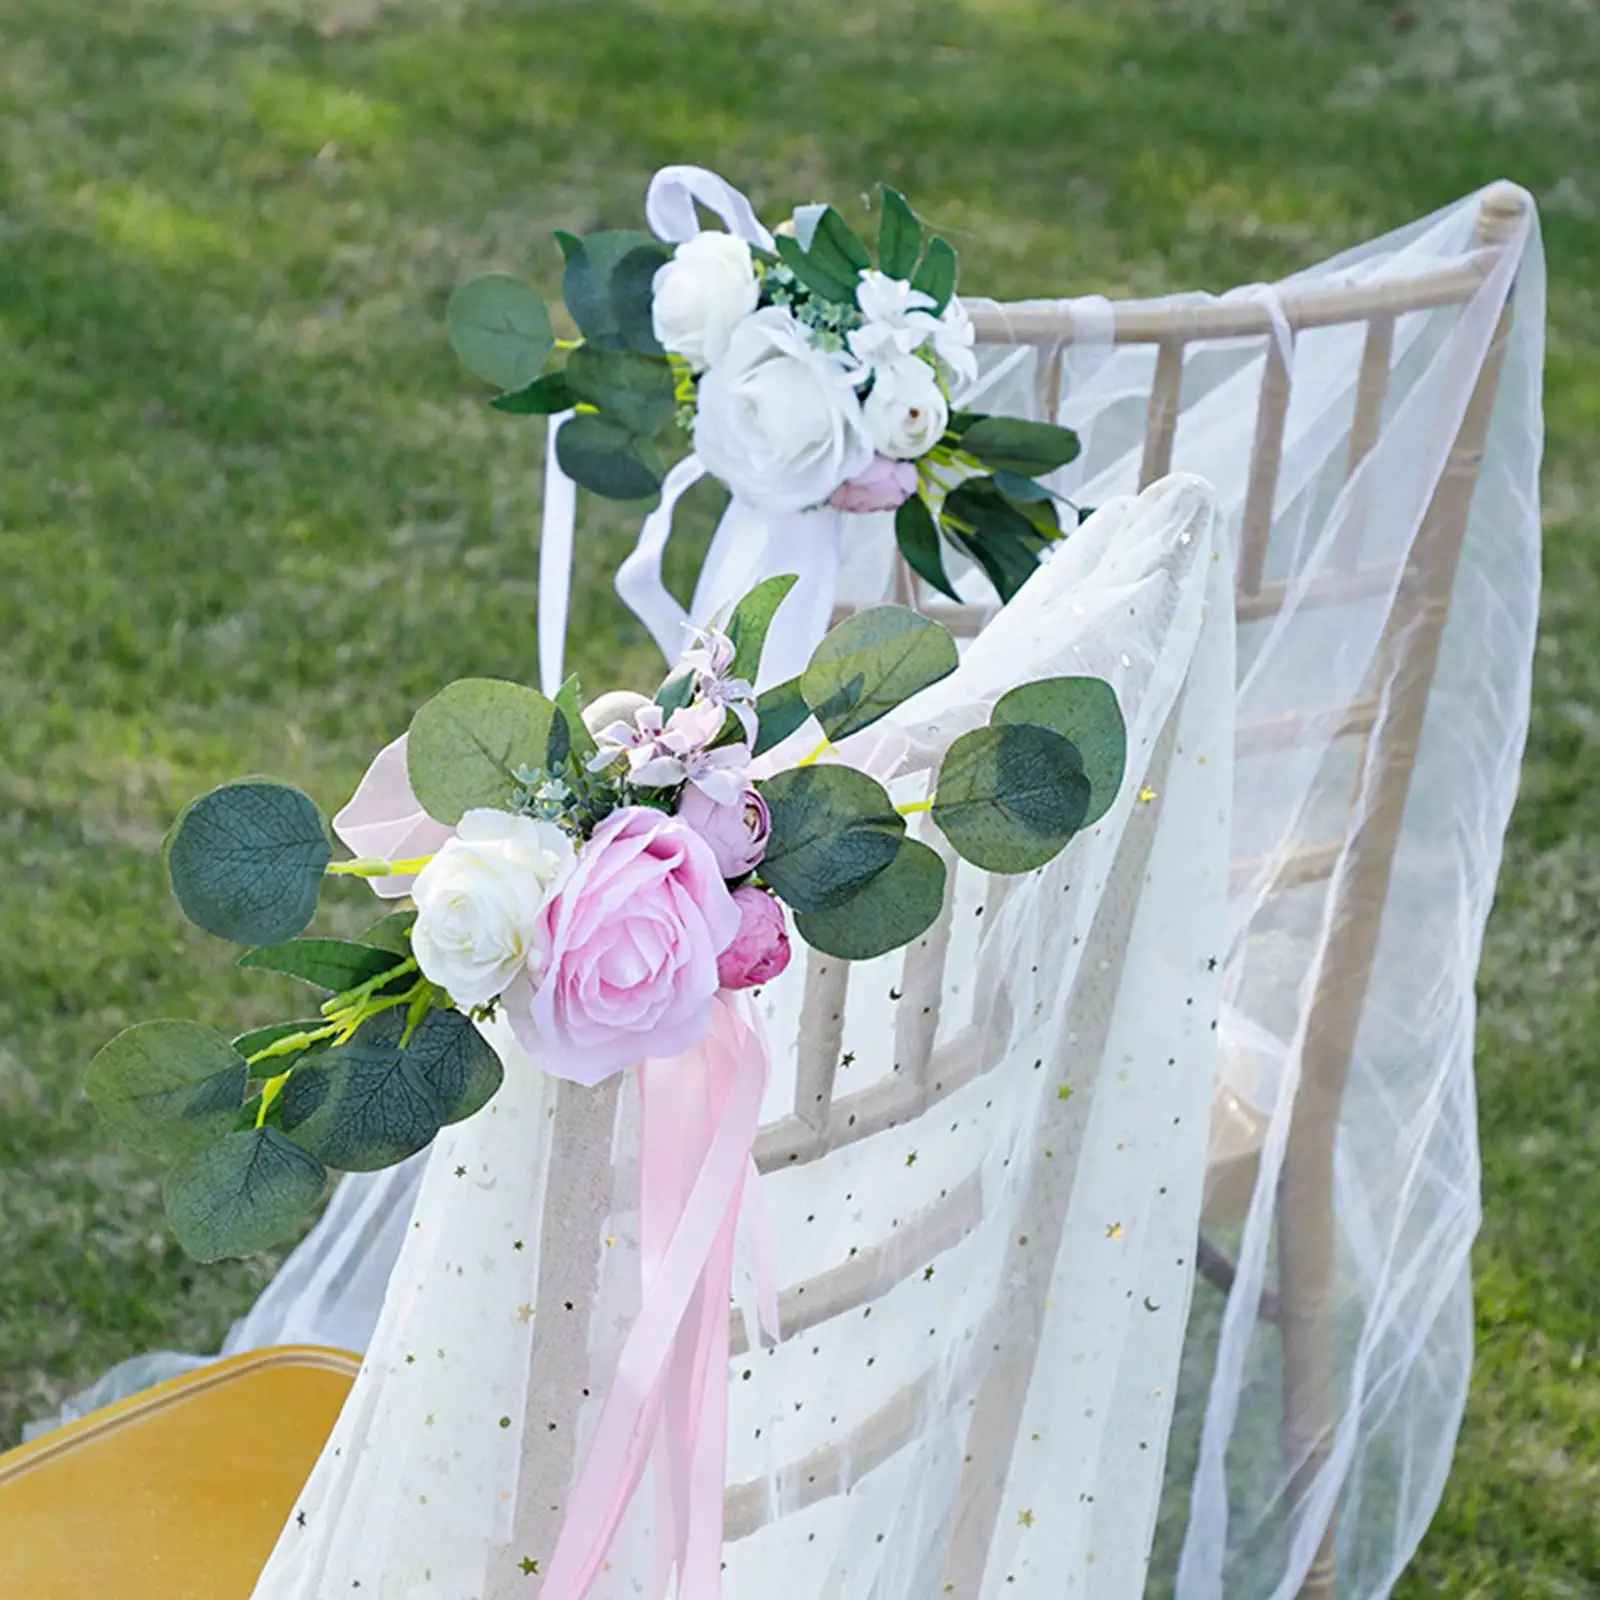 Aisle Chair Back Flower Artificial Bouquet Decoration with Leaves Ribbons Aisle Flower for Garden Event Outdoor Party Banquet